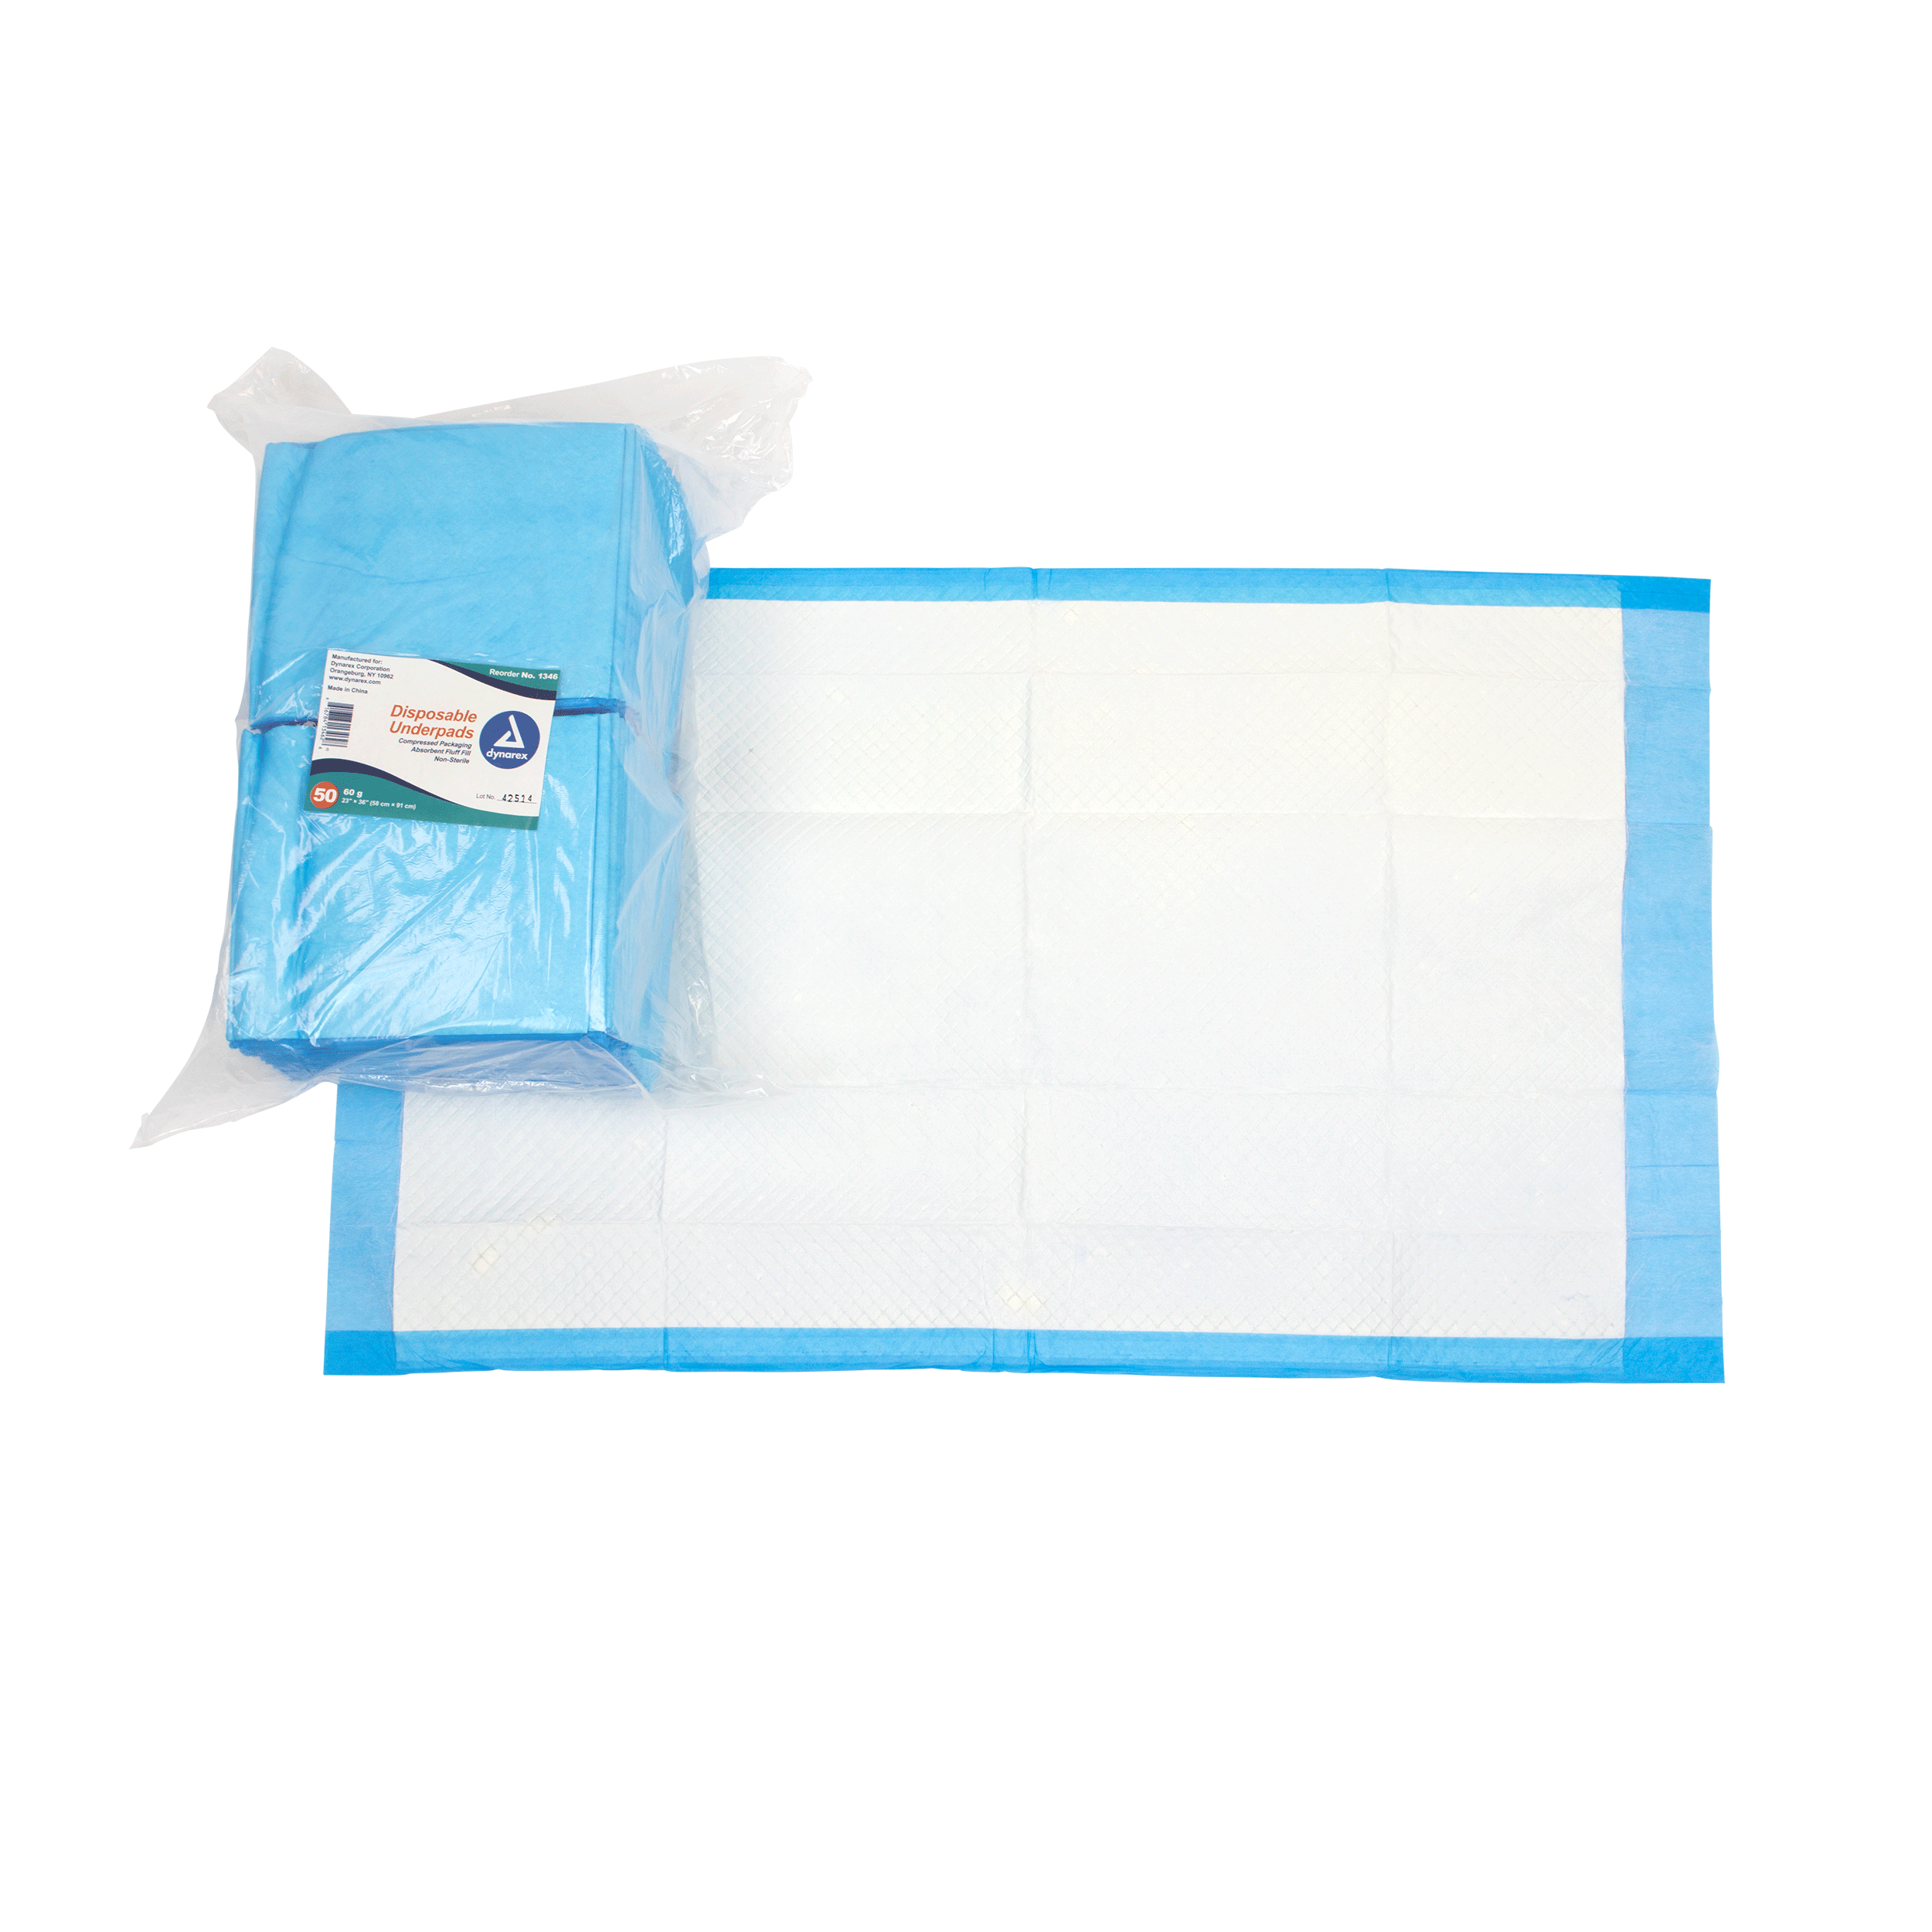 Disposable Underpads, 23 x 36 (60 g)